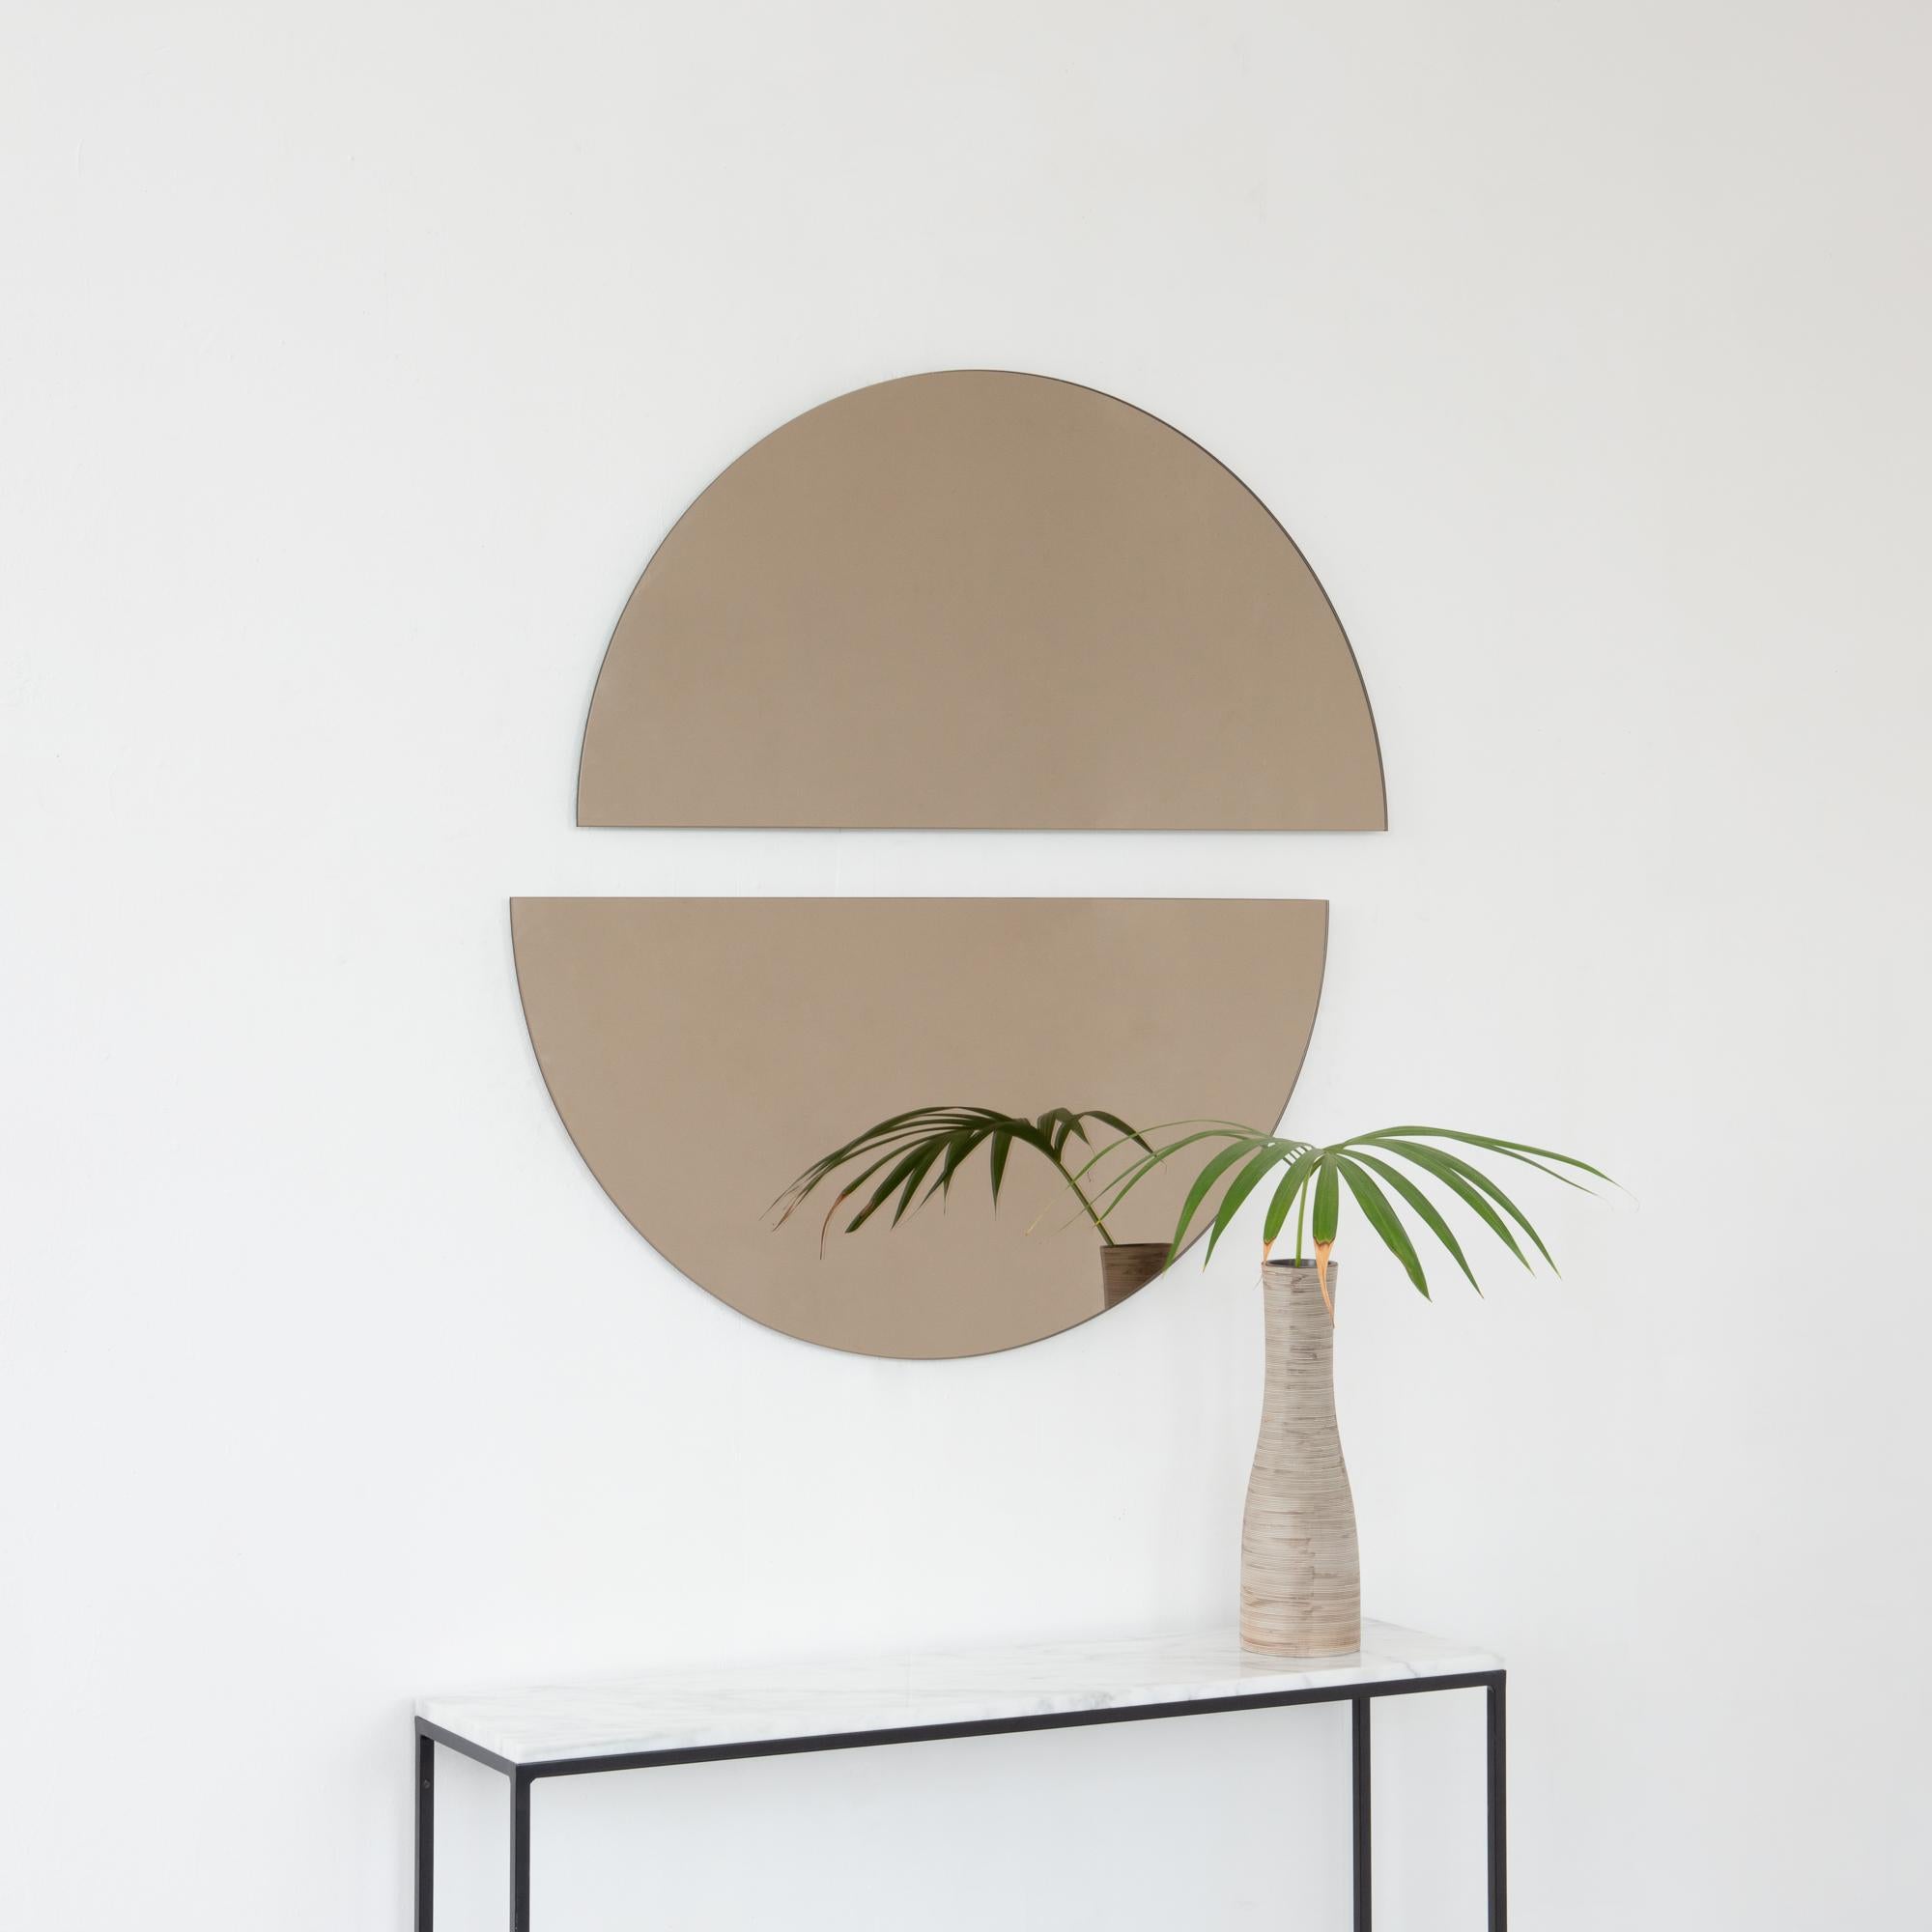 Set of two minimalist half-moon Luna™ bronze tinted frameless mirrors with a floating effect. Fitted with a quality hanging system for a flexible installation in 4 different directions. Designed and made in London, UK. 

Our mirrors